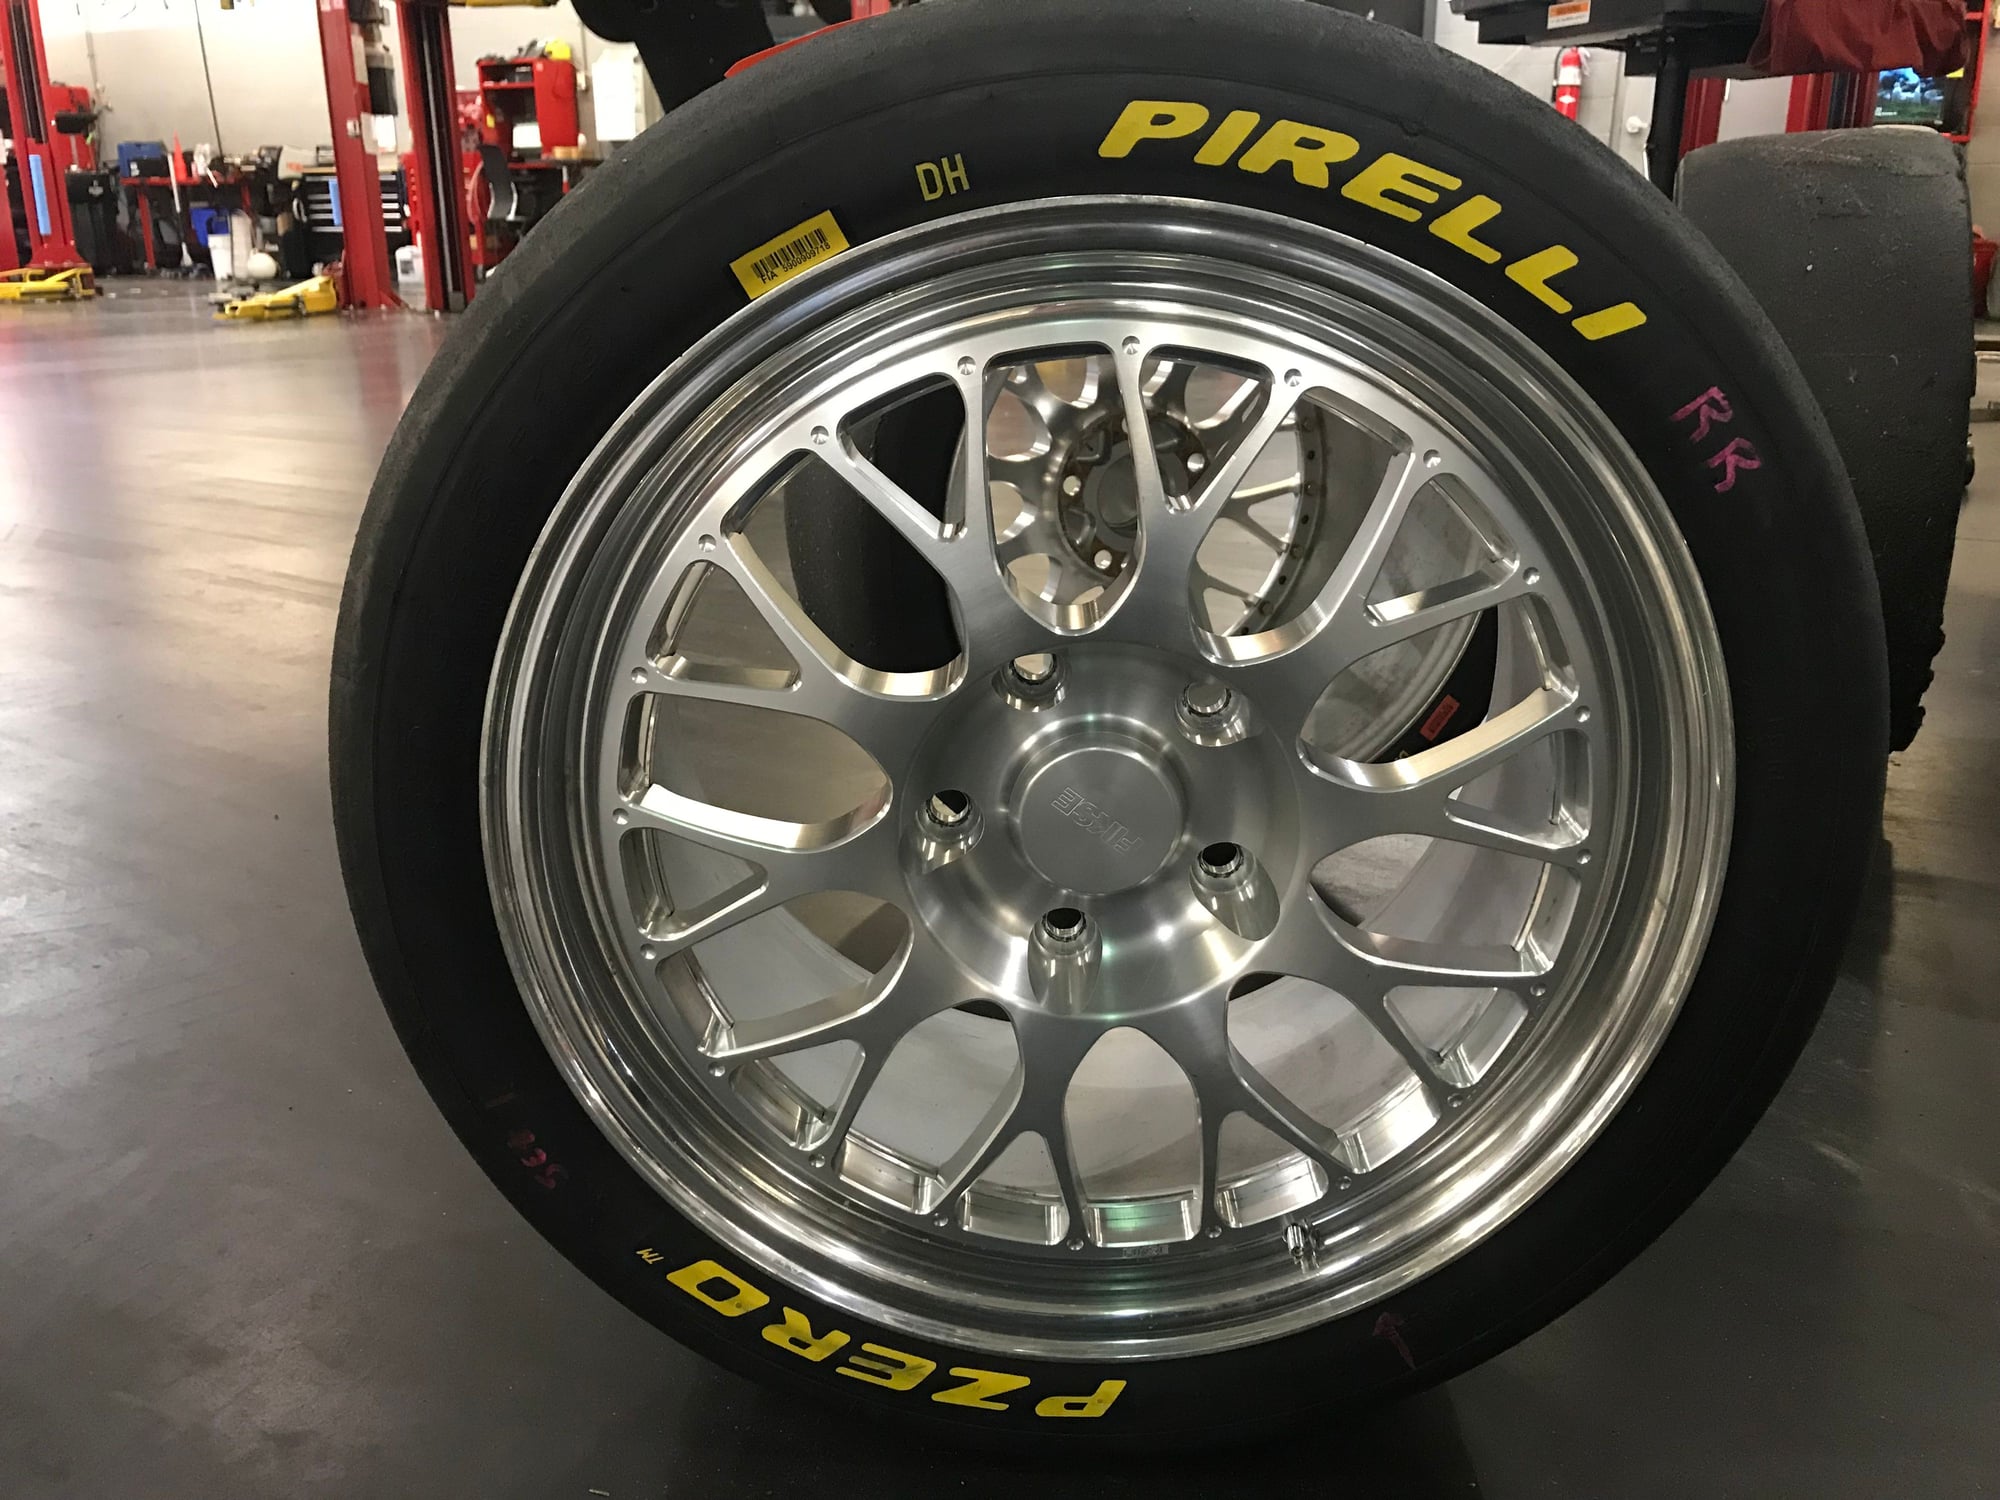 Wheels and Tires/Axles - Fikse 18"x8.5" & 18"x10" wheels for sale $2,500 each set of 4, New Condition! - Used - Birmingham, AL 35226, United States